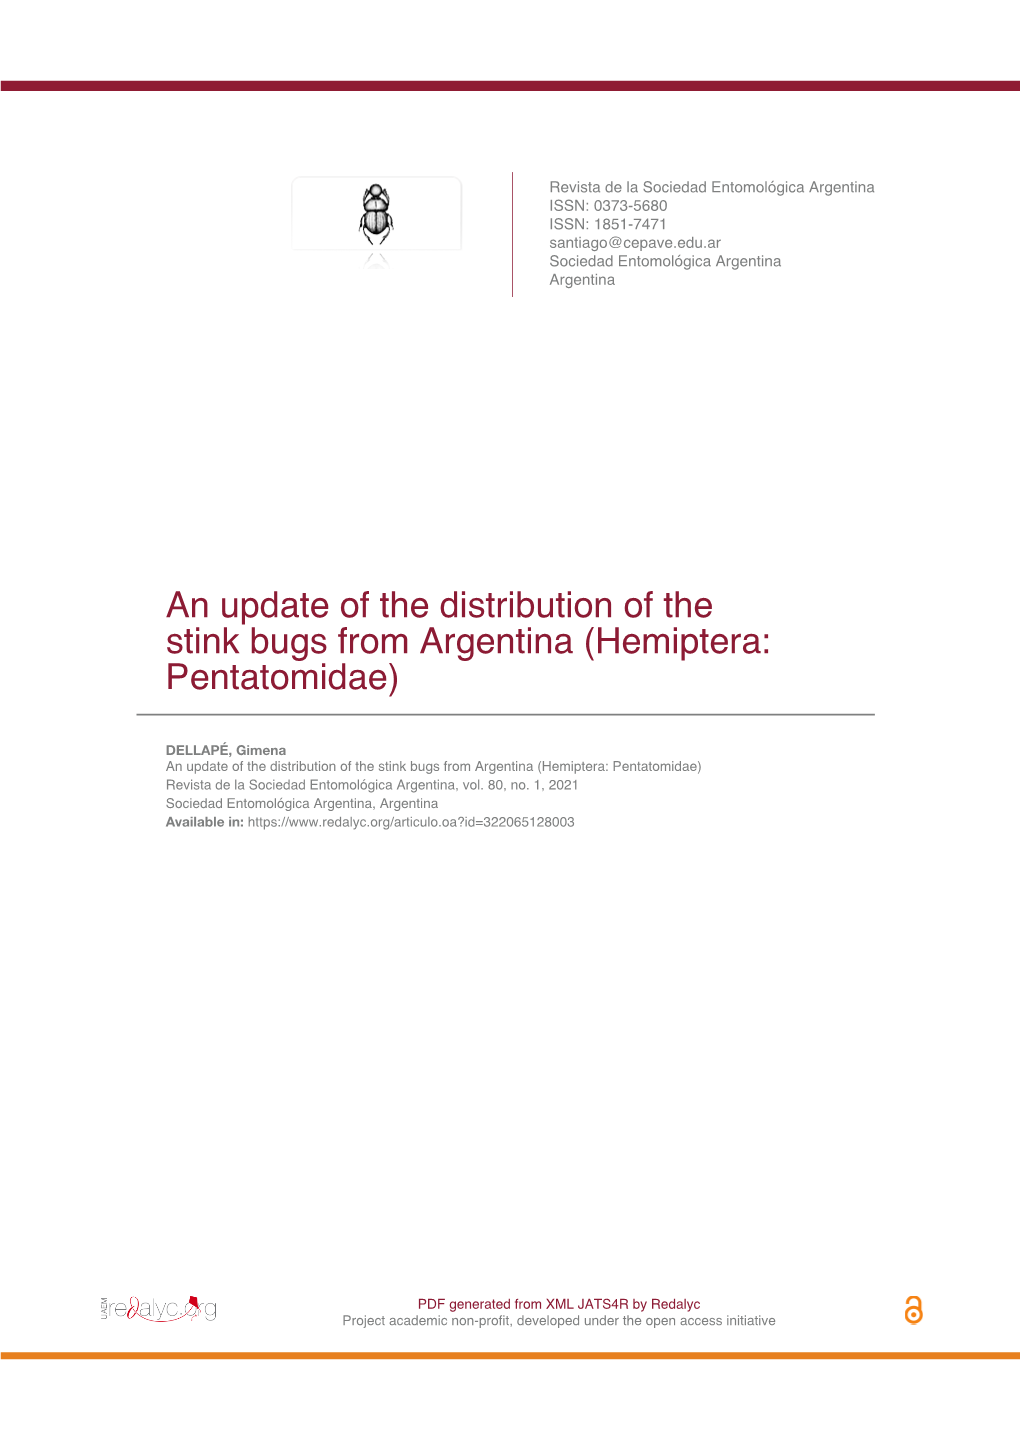 An Update of the Distribution of the Stink Bugs from Argentina (Hemiptera: Pentatomidae)